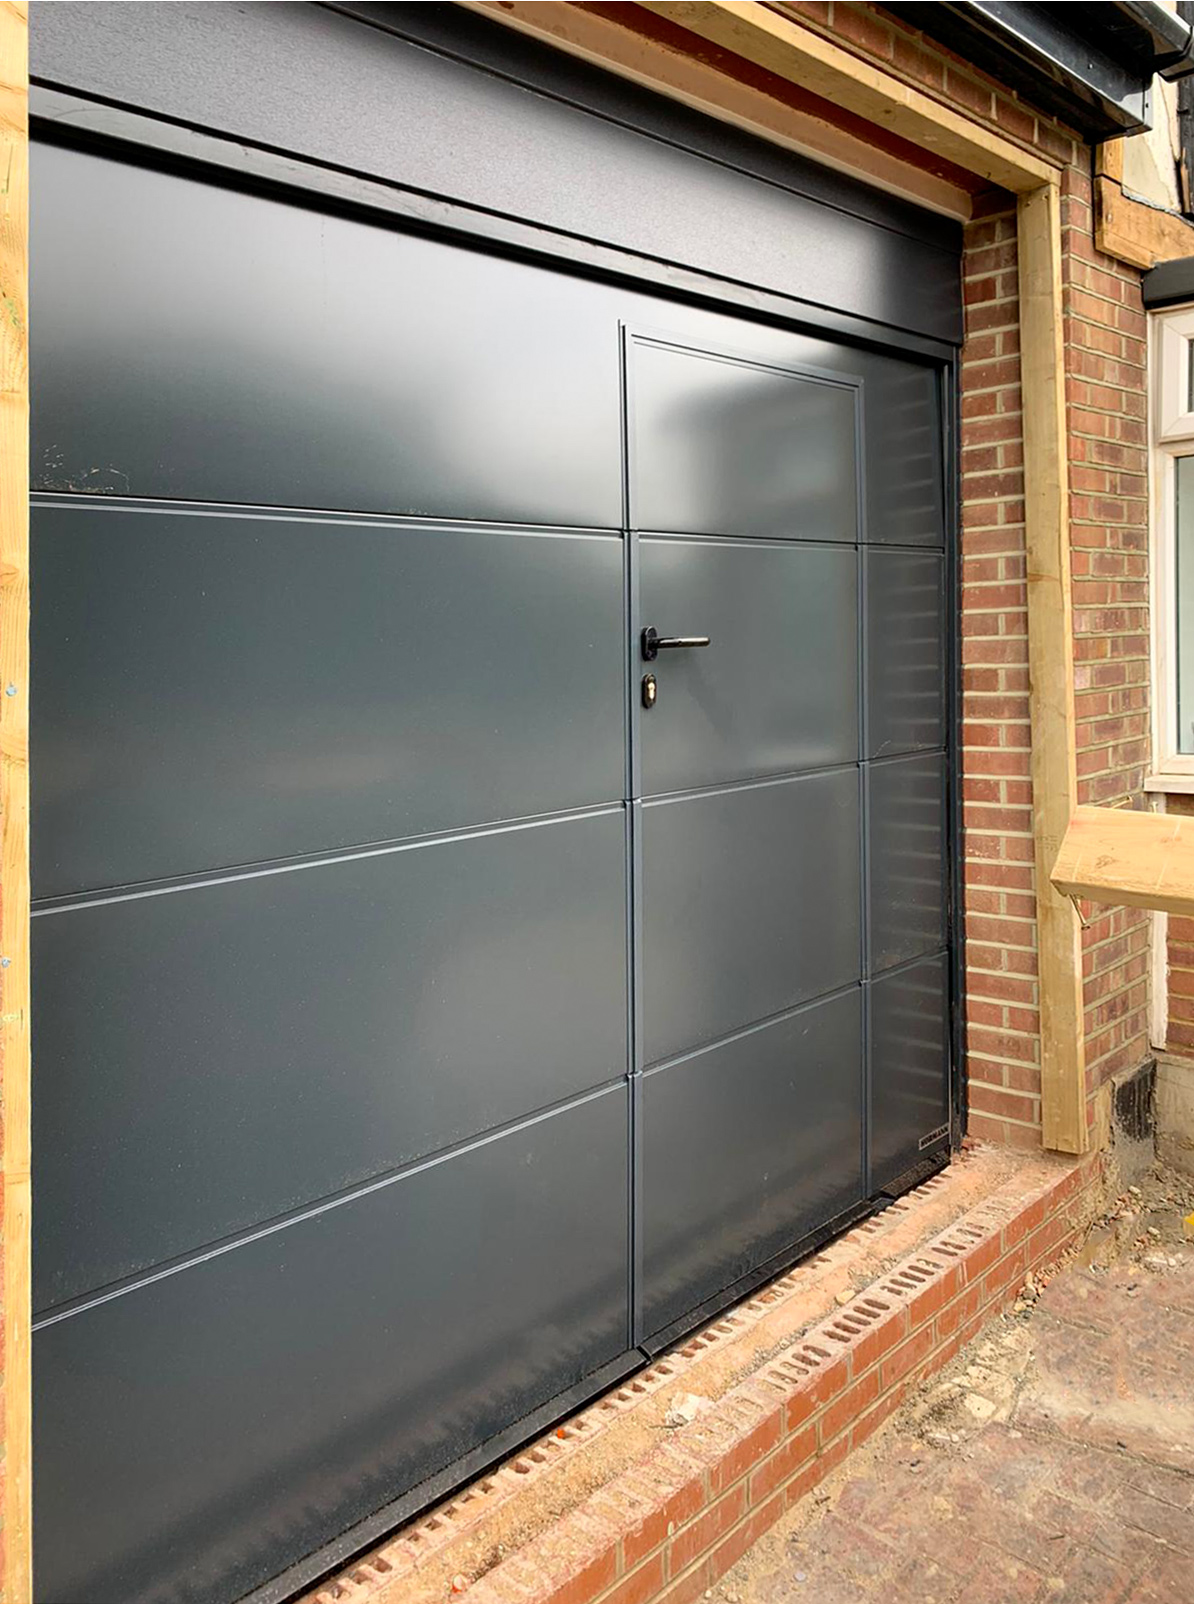 A Hormann Lpu42 L Ribbed Sectional Garage Door Wicket Door Finished In Anthracite Grey